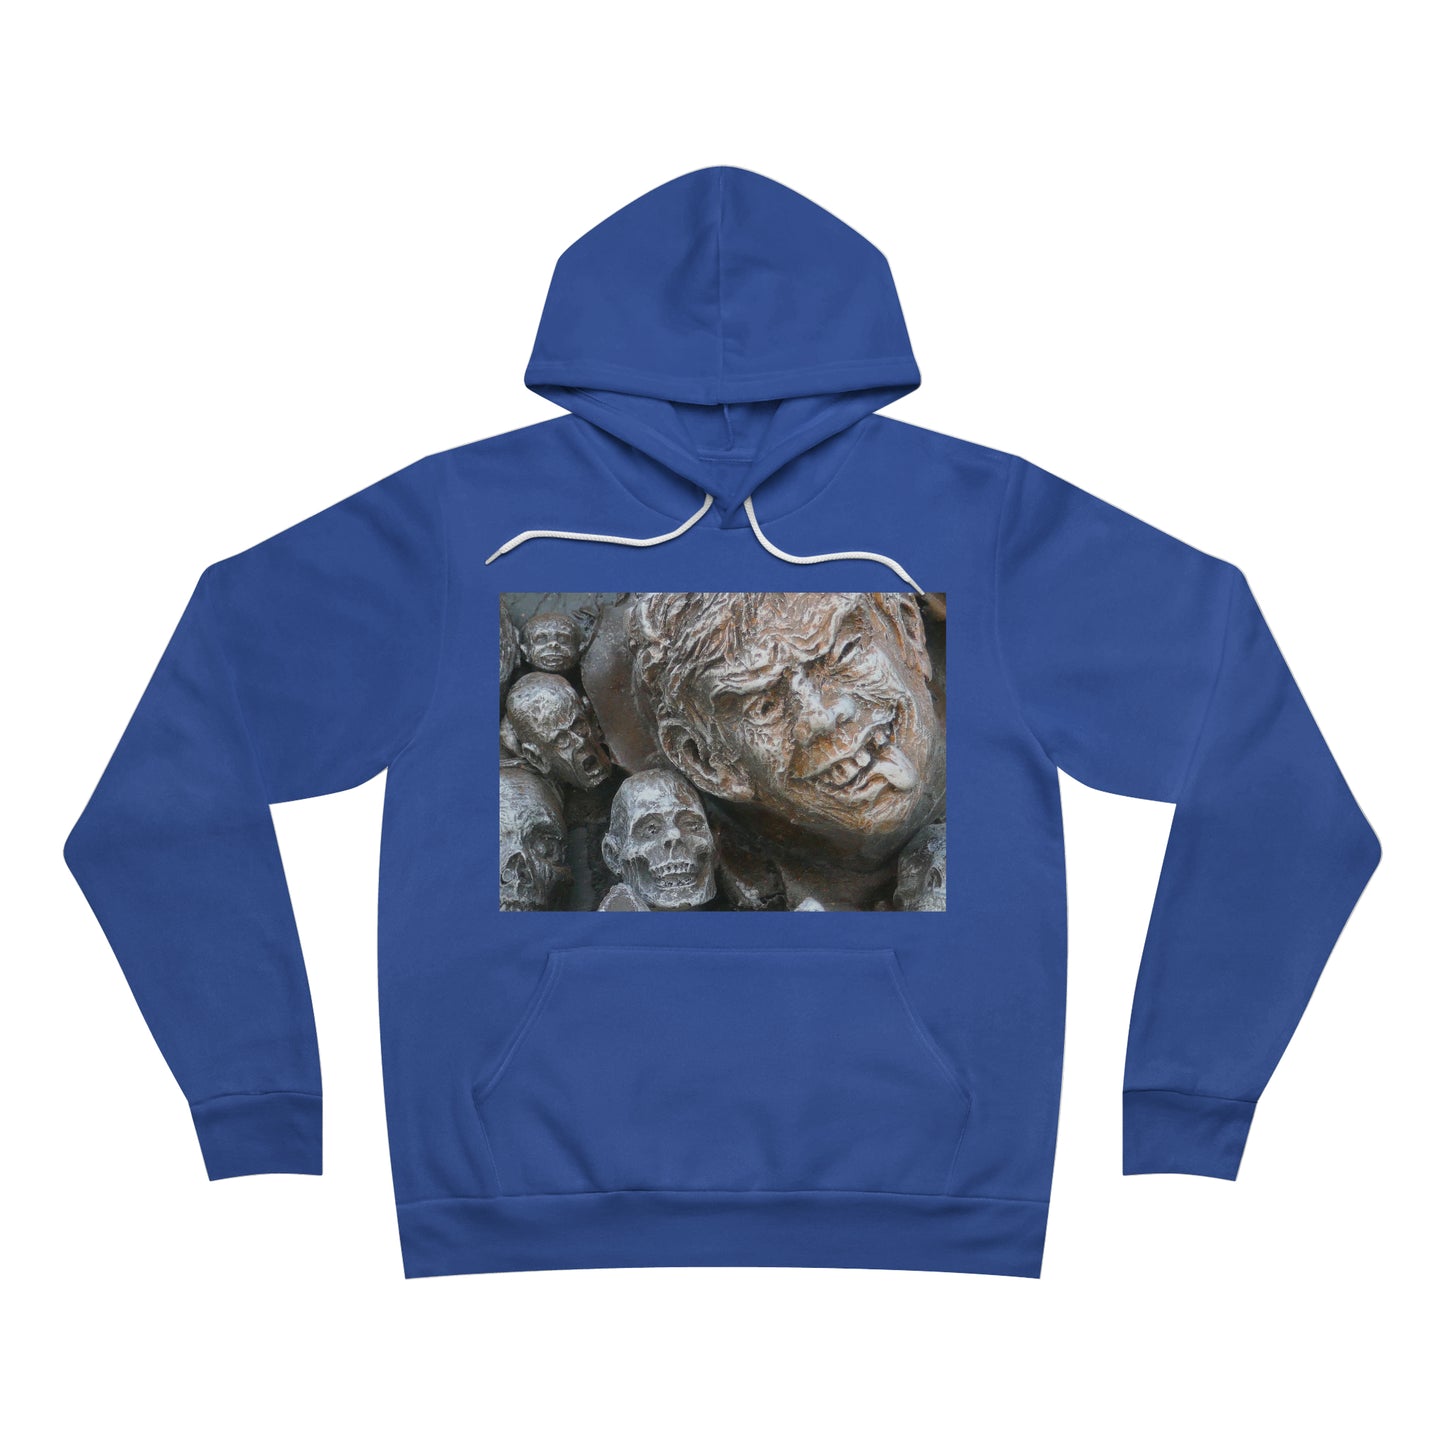 Waiting for the King - Unisex Sponge Fleece Pullover Hoodie - Fry1Productions